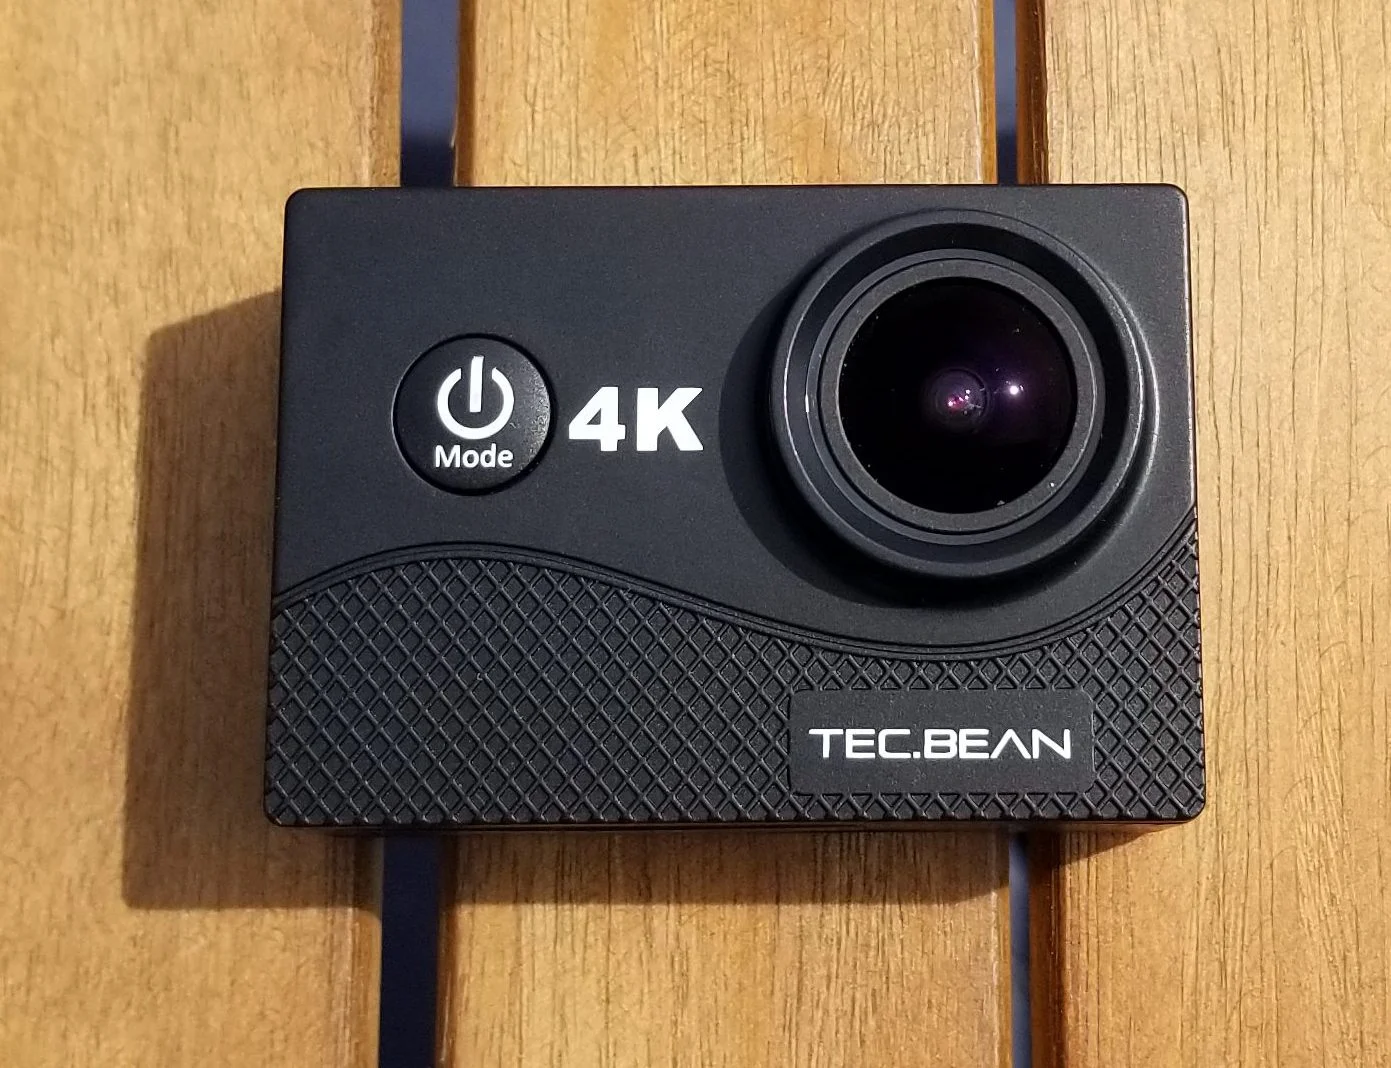 How To Install The Battery On A Tec.Bean 4K Action Camera